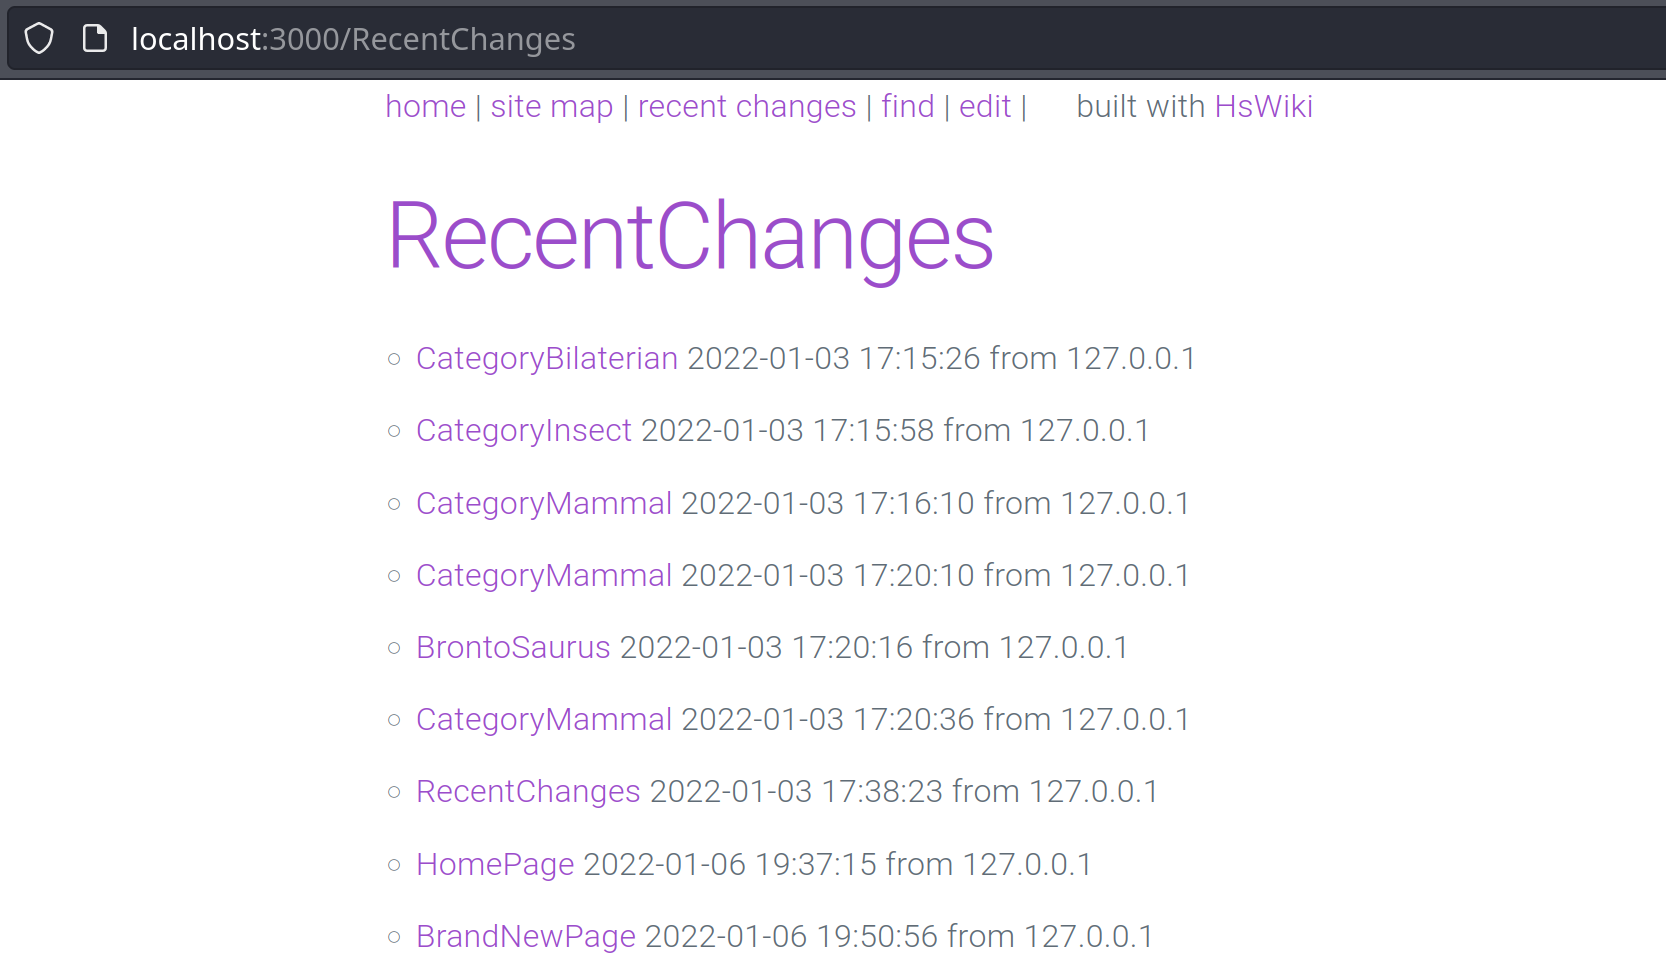 The RecentChanges page